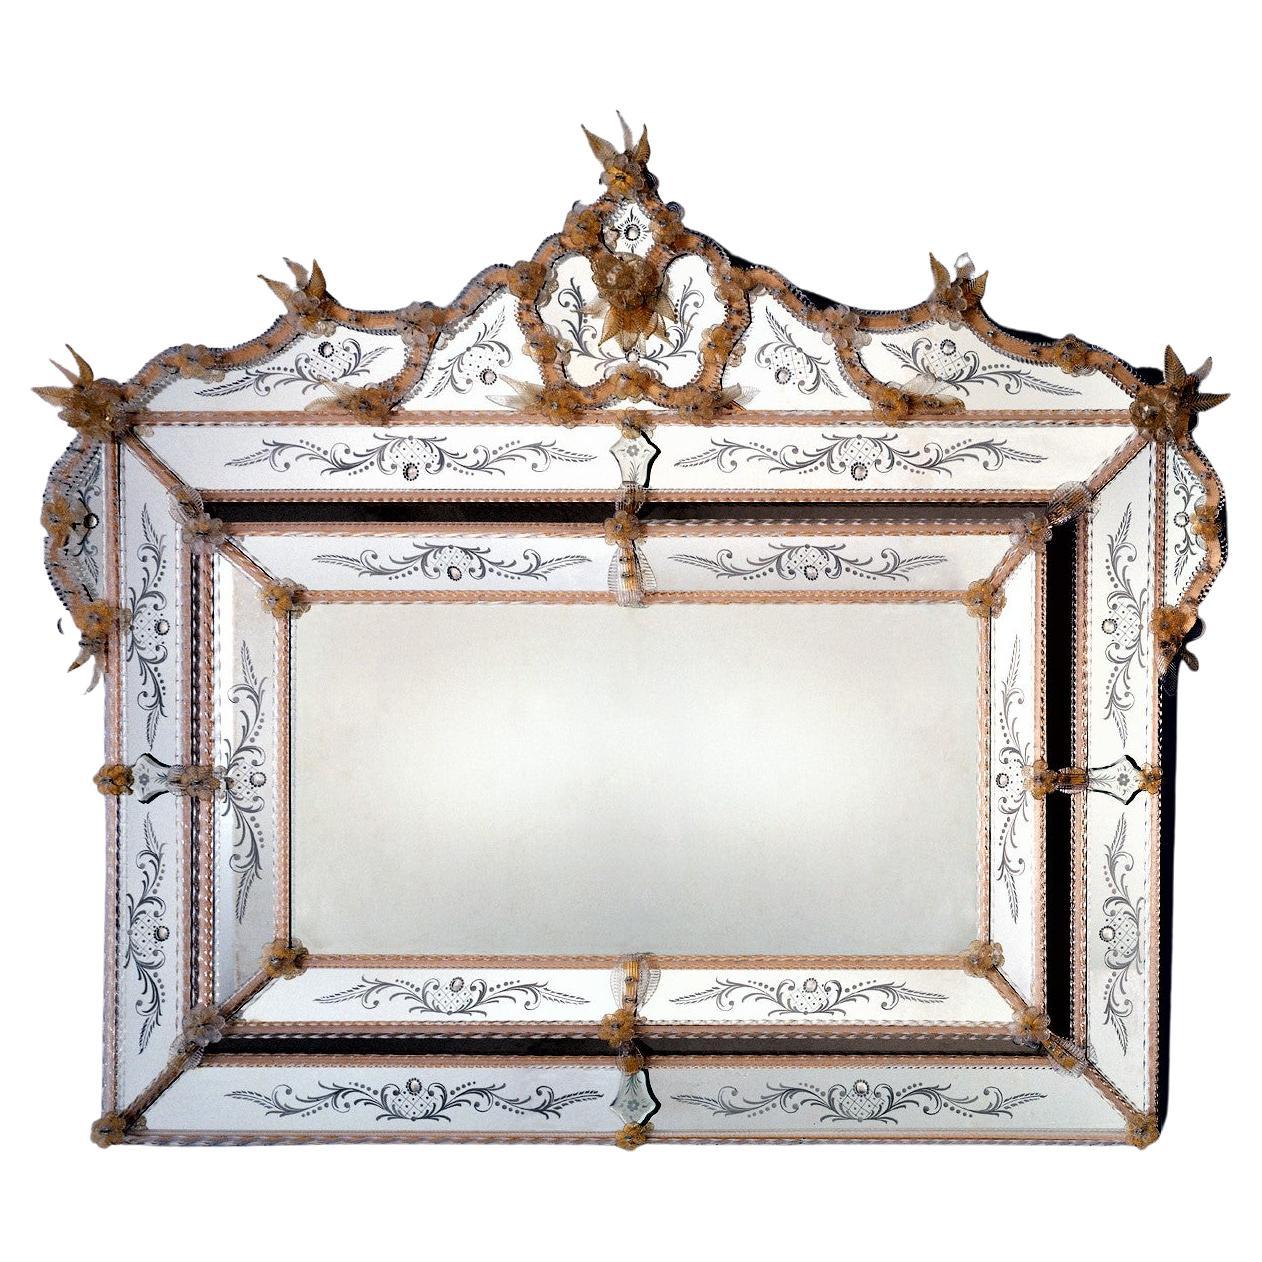 "Hayez" Murano Glass Mirror in Venetian Style by Fratelli Tosi, Made in Italy